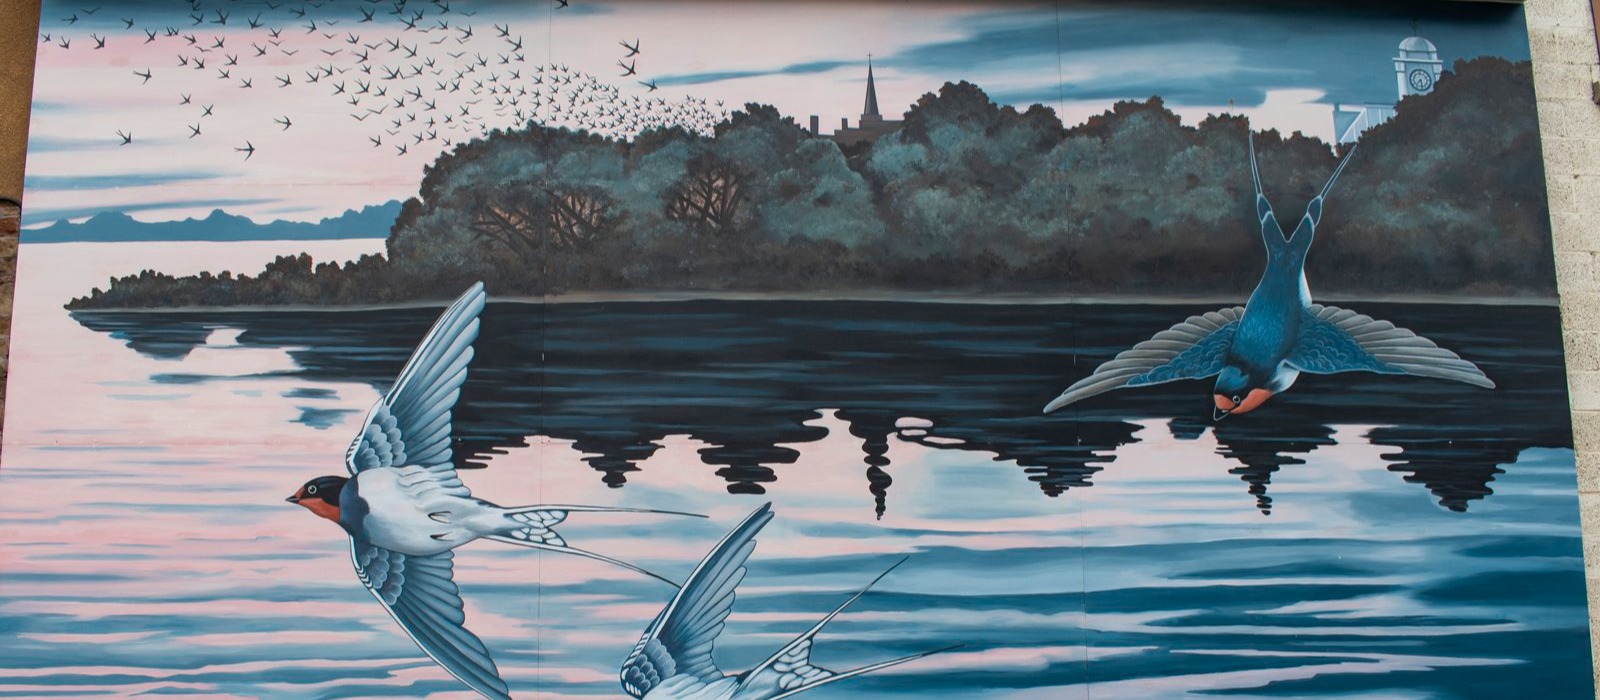 Pembroke Swallows. Painted by Neil Blackwell. Swallows come out from the Pembroke Waterfront with City Hall in the background.